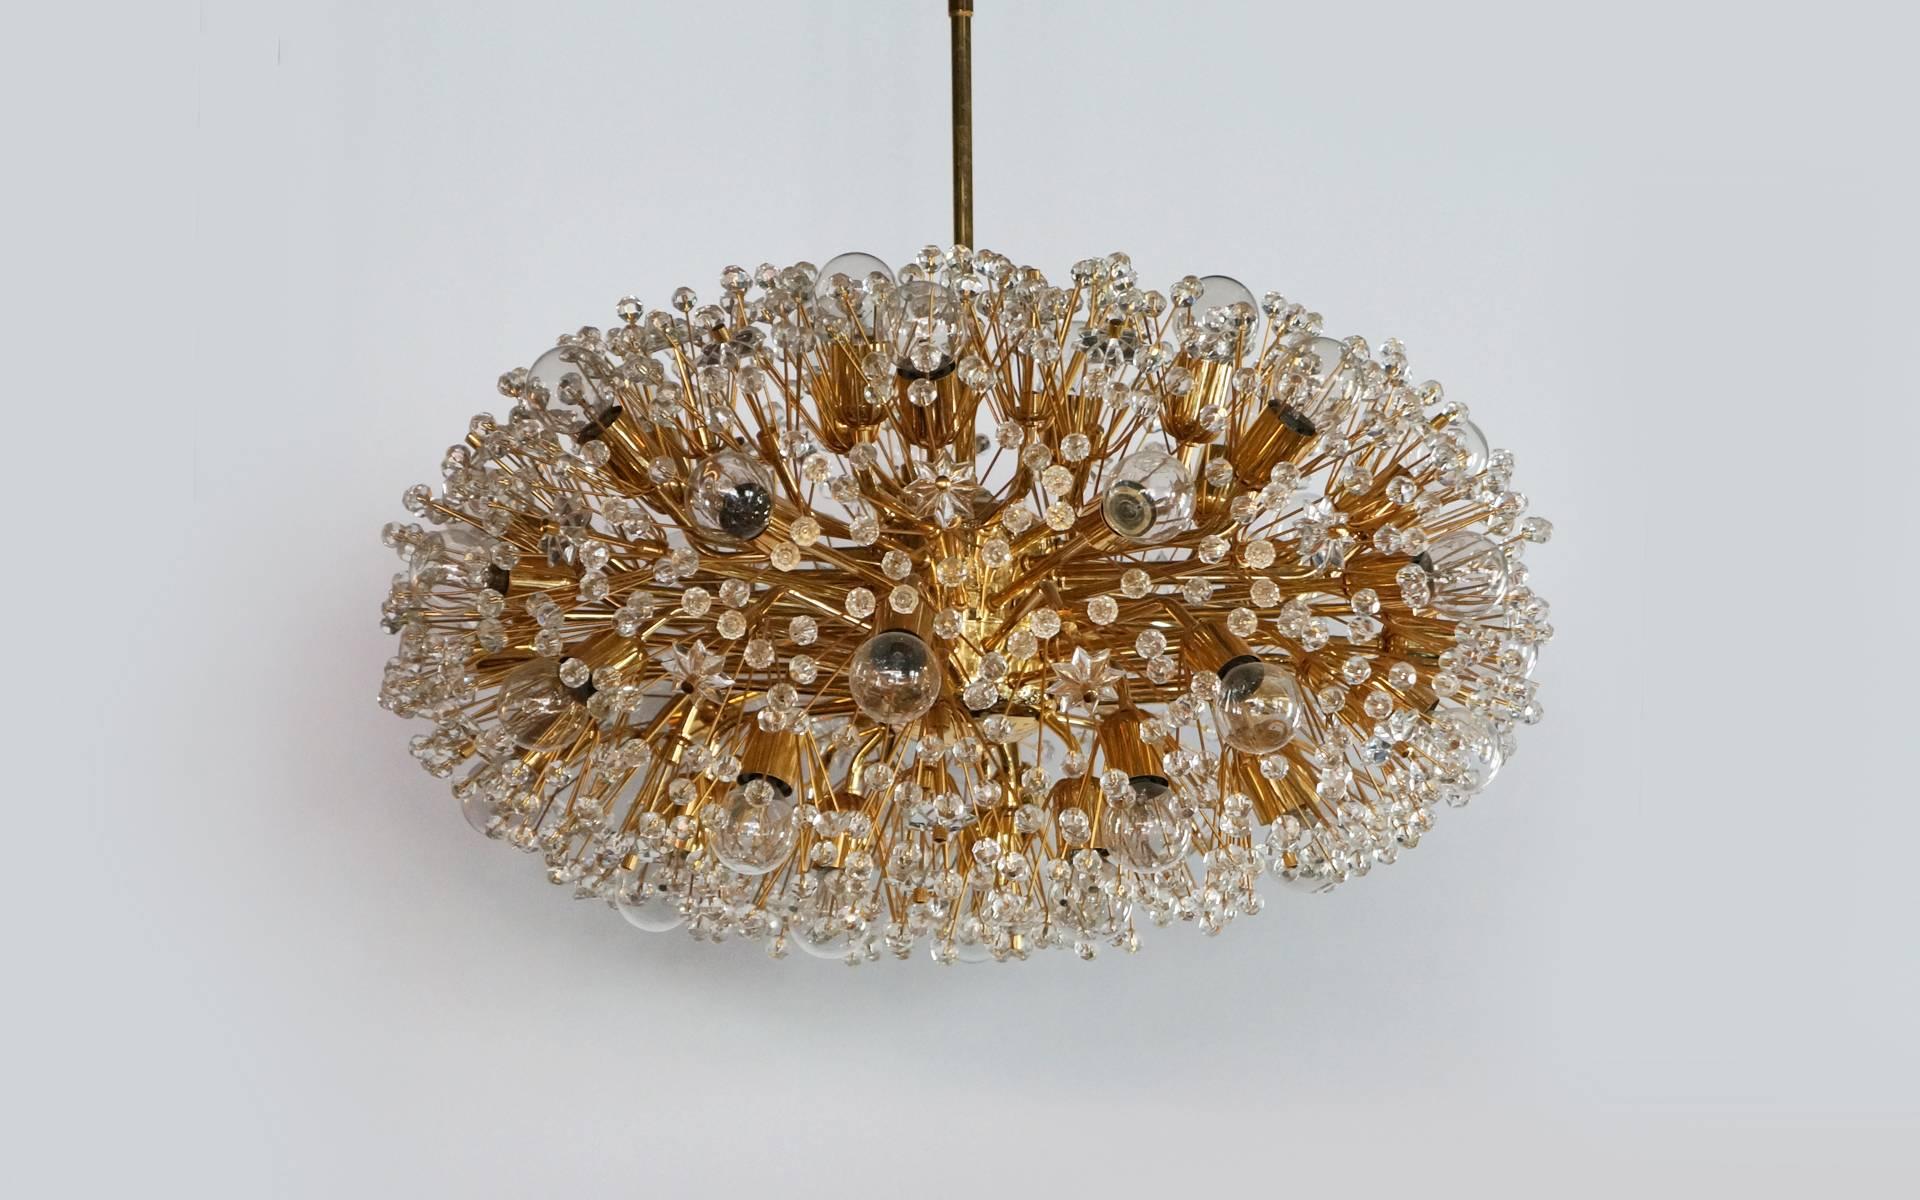 Oval / saucer shaped chandelier designed by Emil Stejnar and made in Vienna by Rupert Nikoli. This is a 24-carat gold-plated fixture covered with Austrian crystal balls and stars. There are more than 30 sockets filled with Edison bulbs. This is a